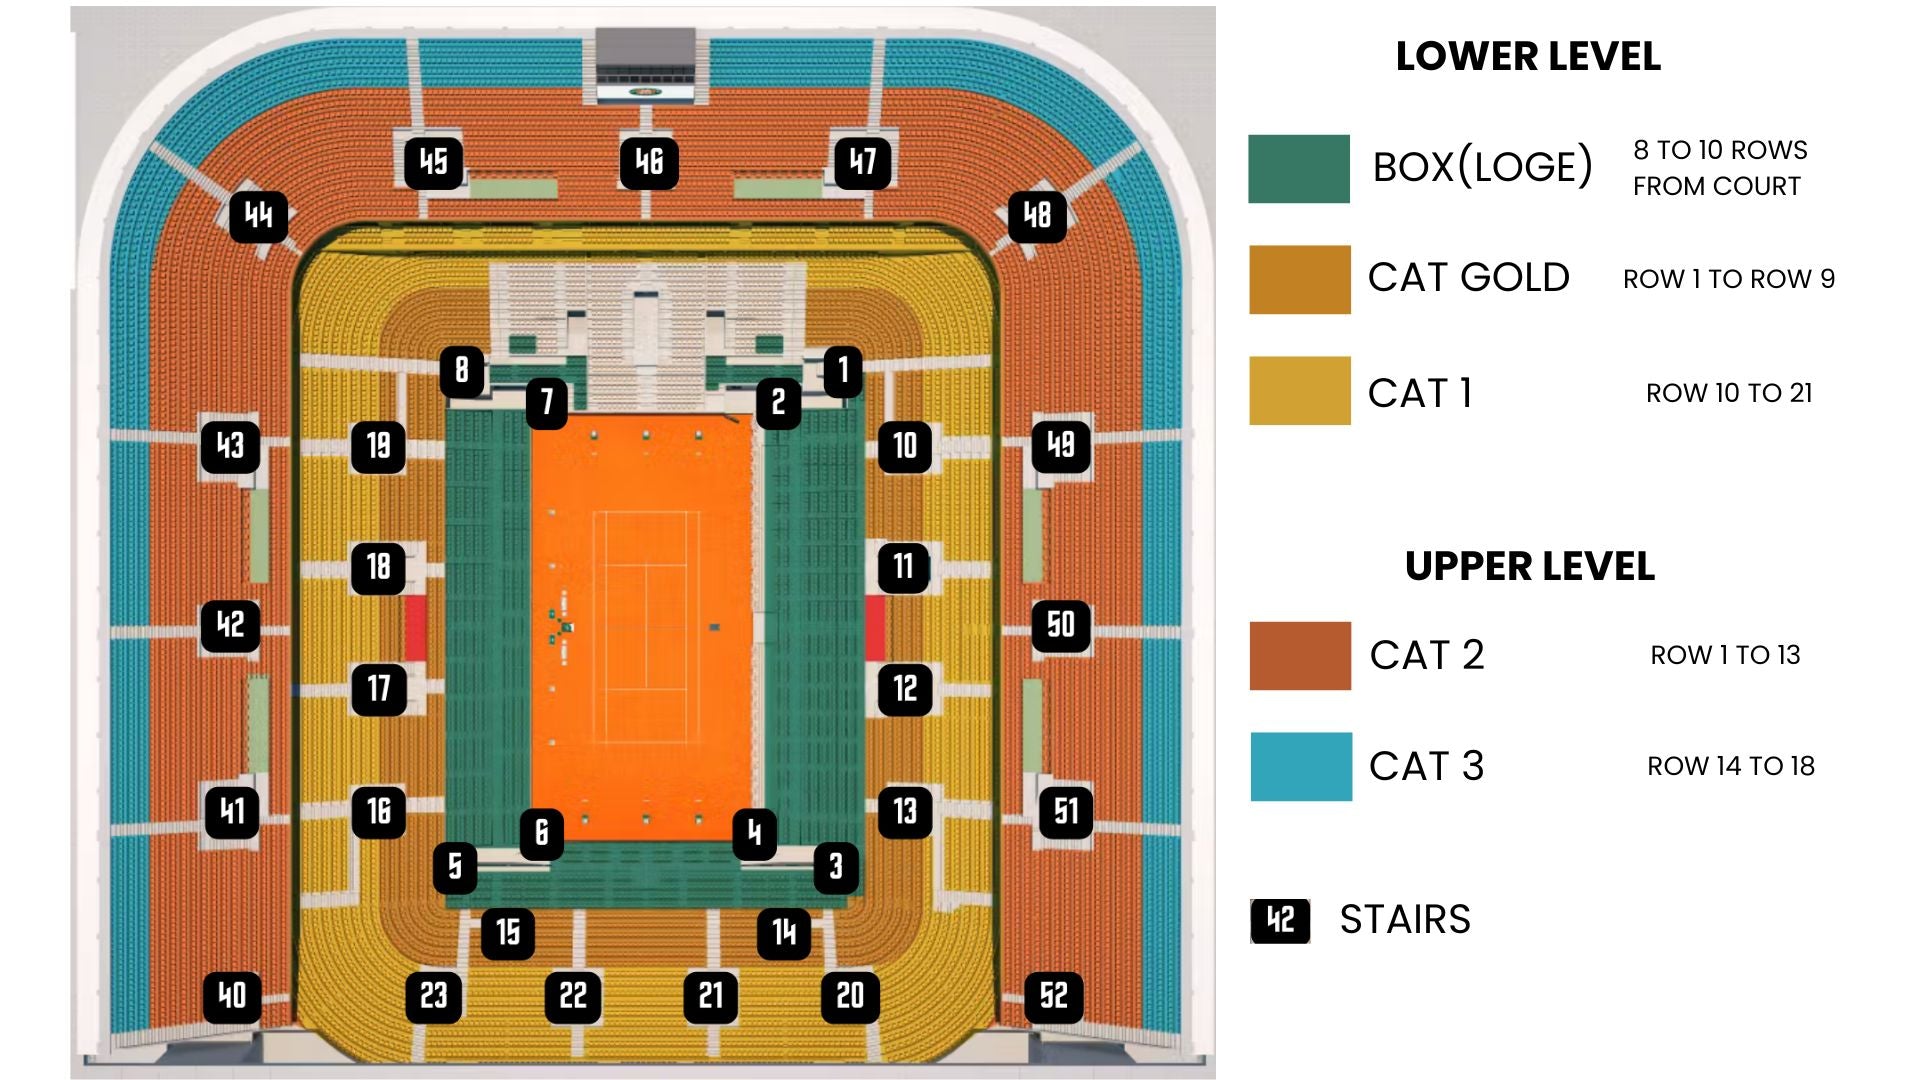 French Open Tickets 5/30/2024 - Thursday Evening Session - Philippe Chatrier (Center Court)